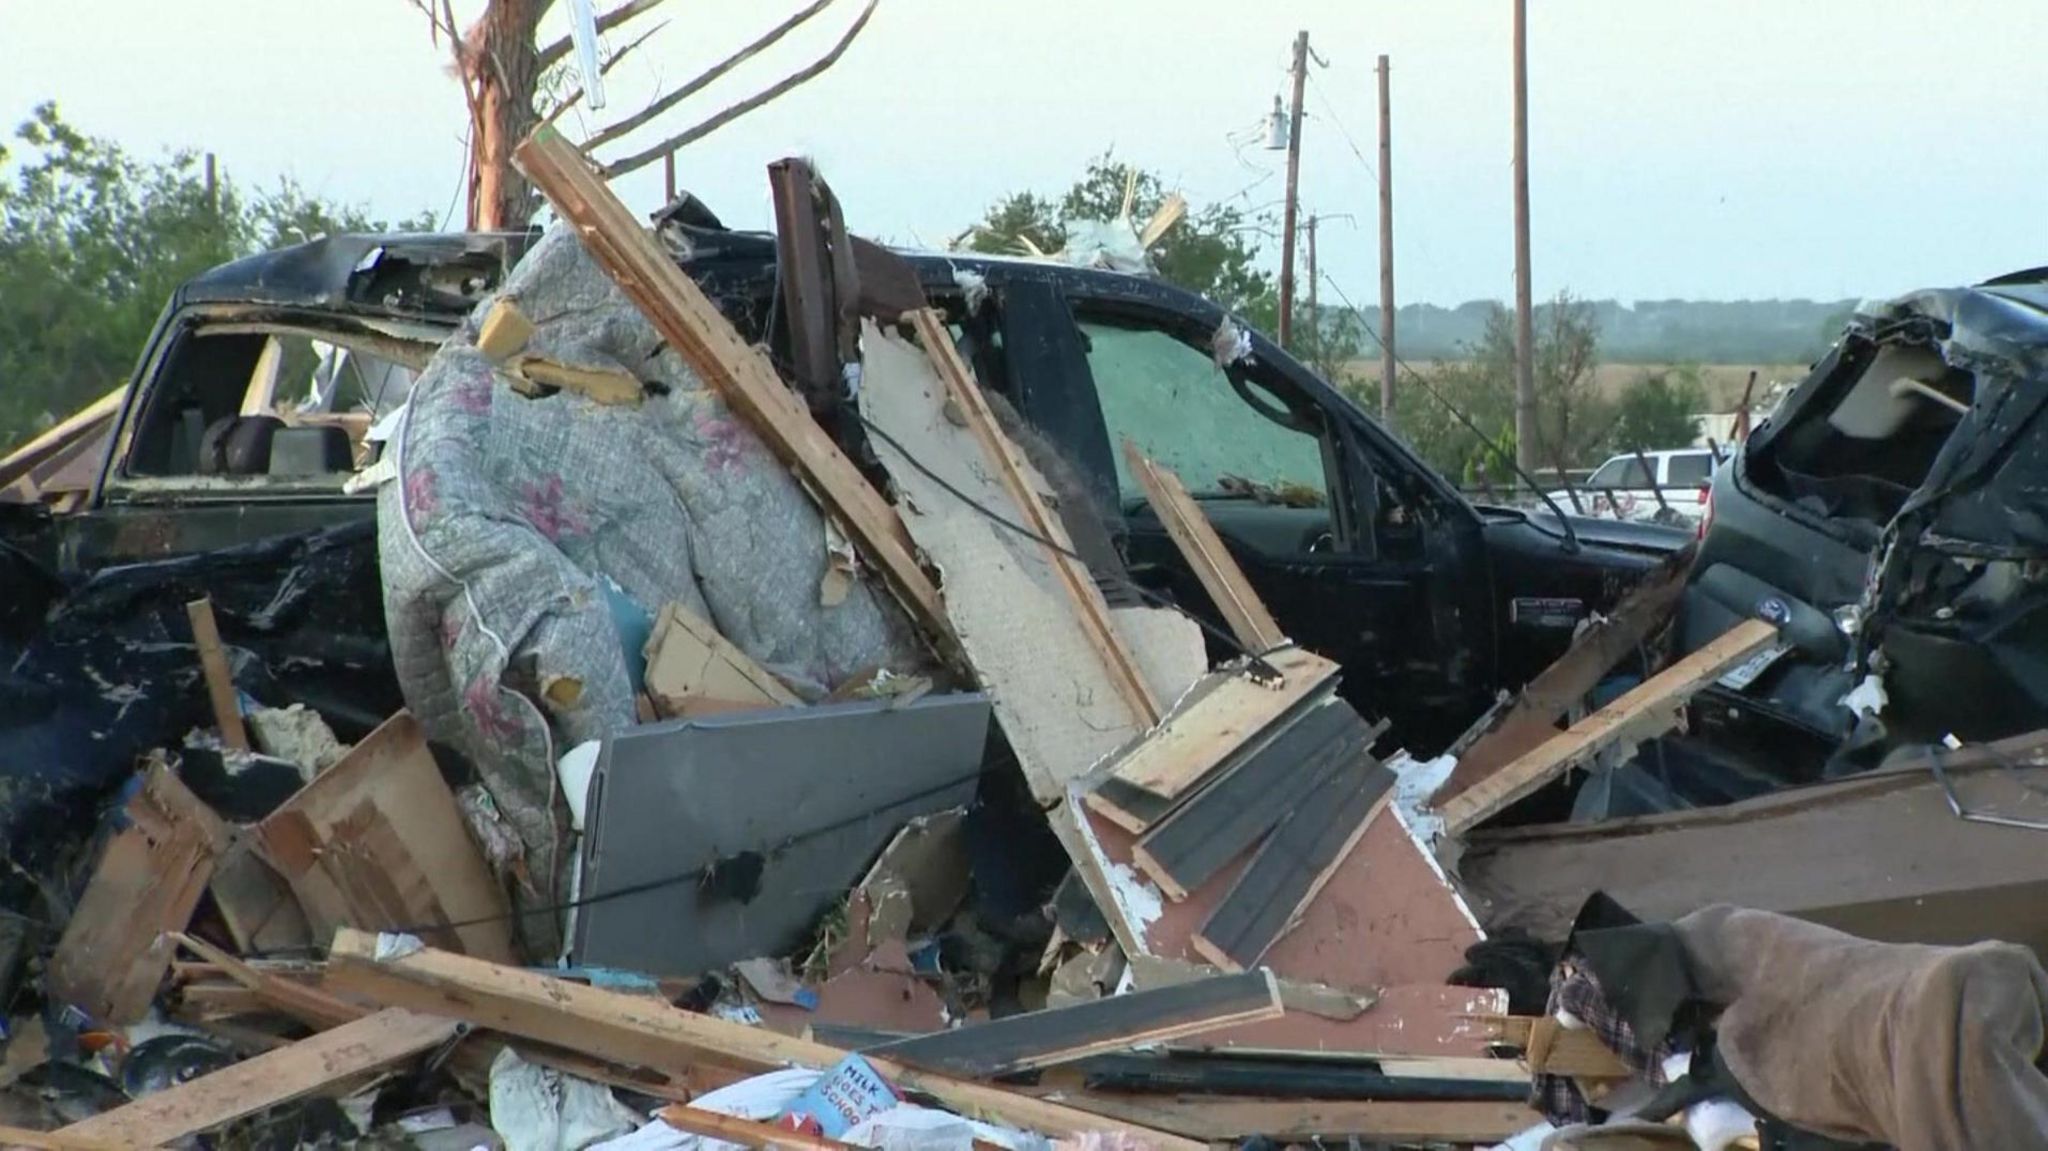 A car sits in a pile of debris after major storms through Texas